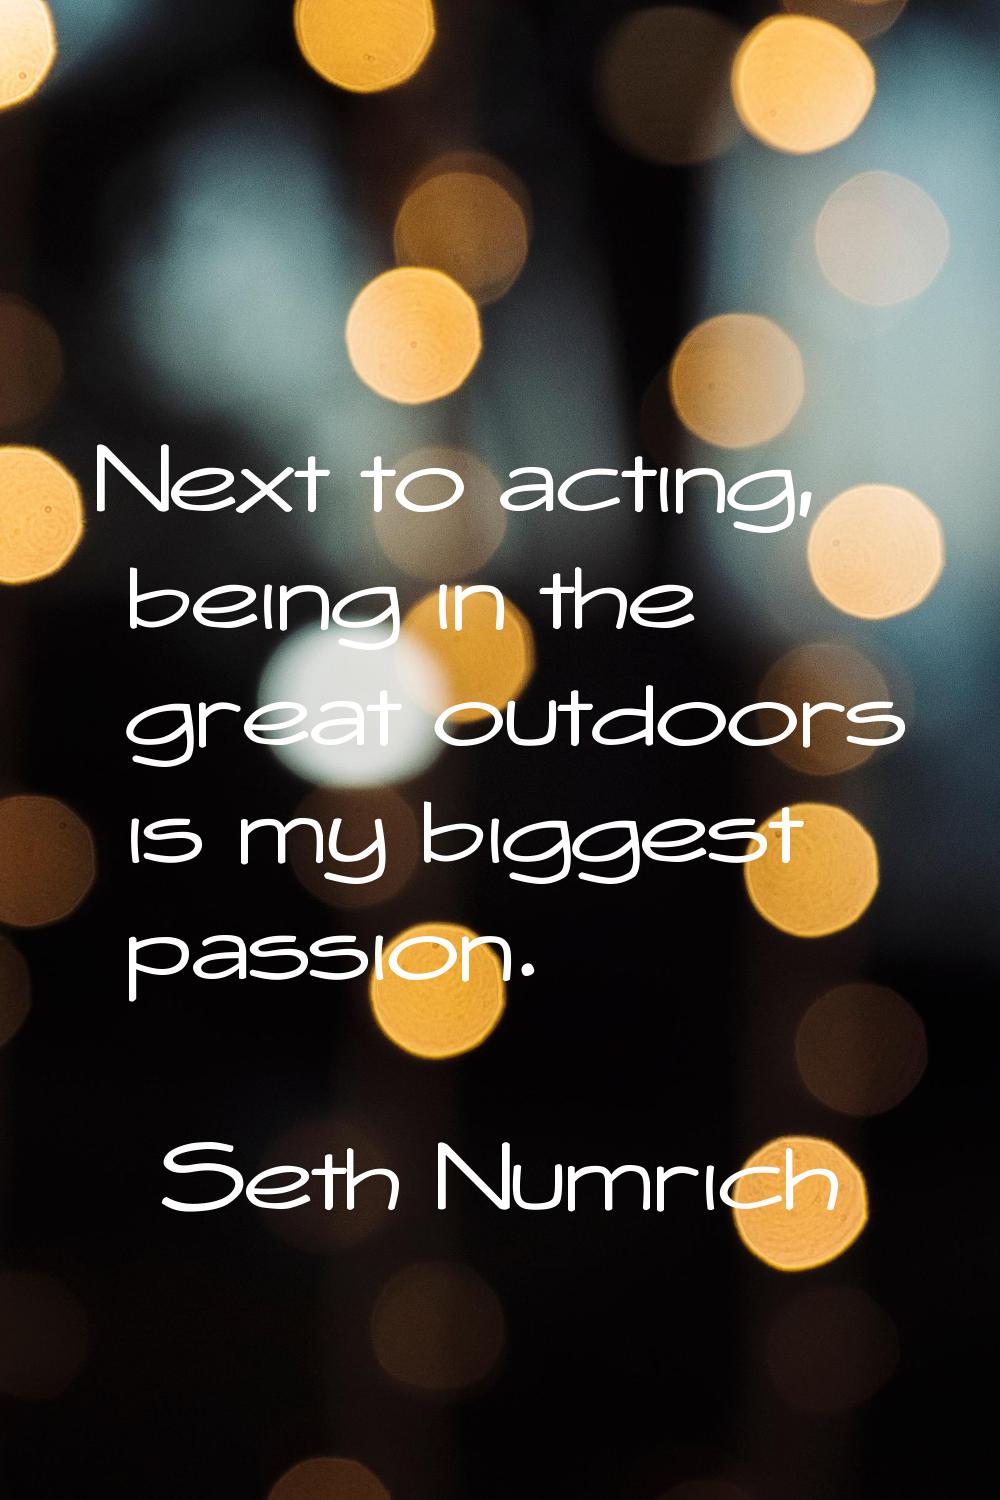 Next to acting, being in the great outdoors is my biggest passion.